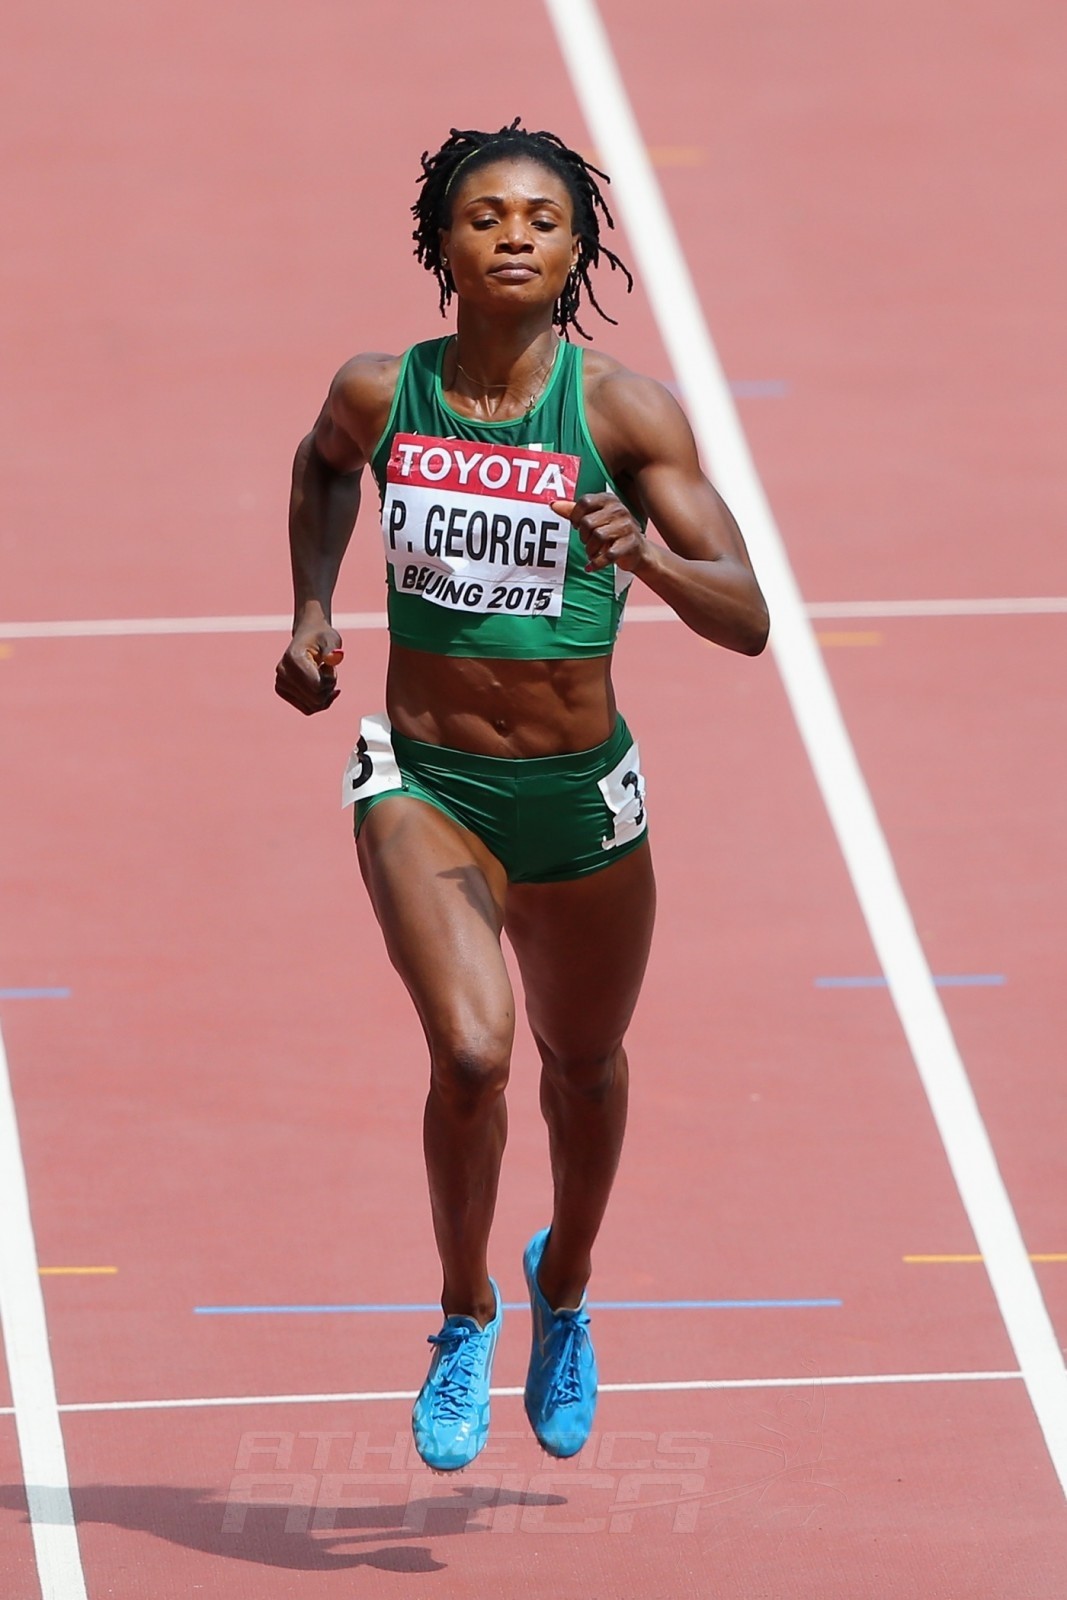 Patience Okon George of Nigeria competes in the Women's 400 metres heats during day three of the 15th IAAF World Athletics Championships Beijing 2015 at Beijing National Stadium on August 24, 2015 in Beijing, China.  (Photo by Lintao Zhang/Getty Images for IAAF) 